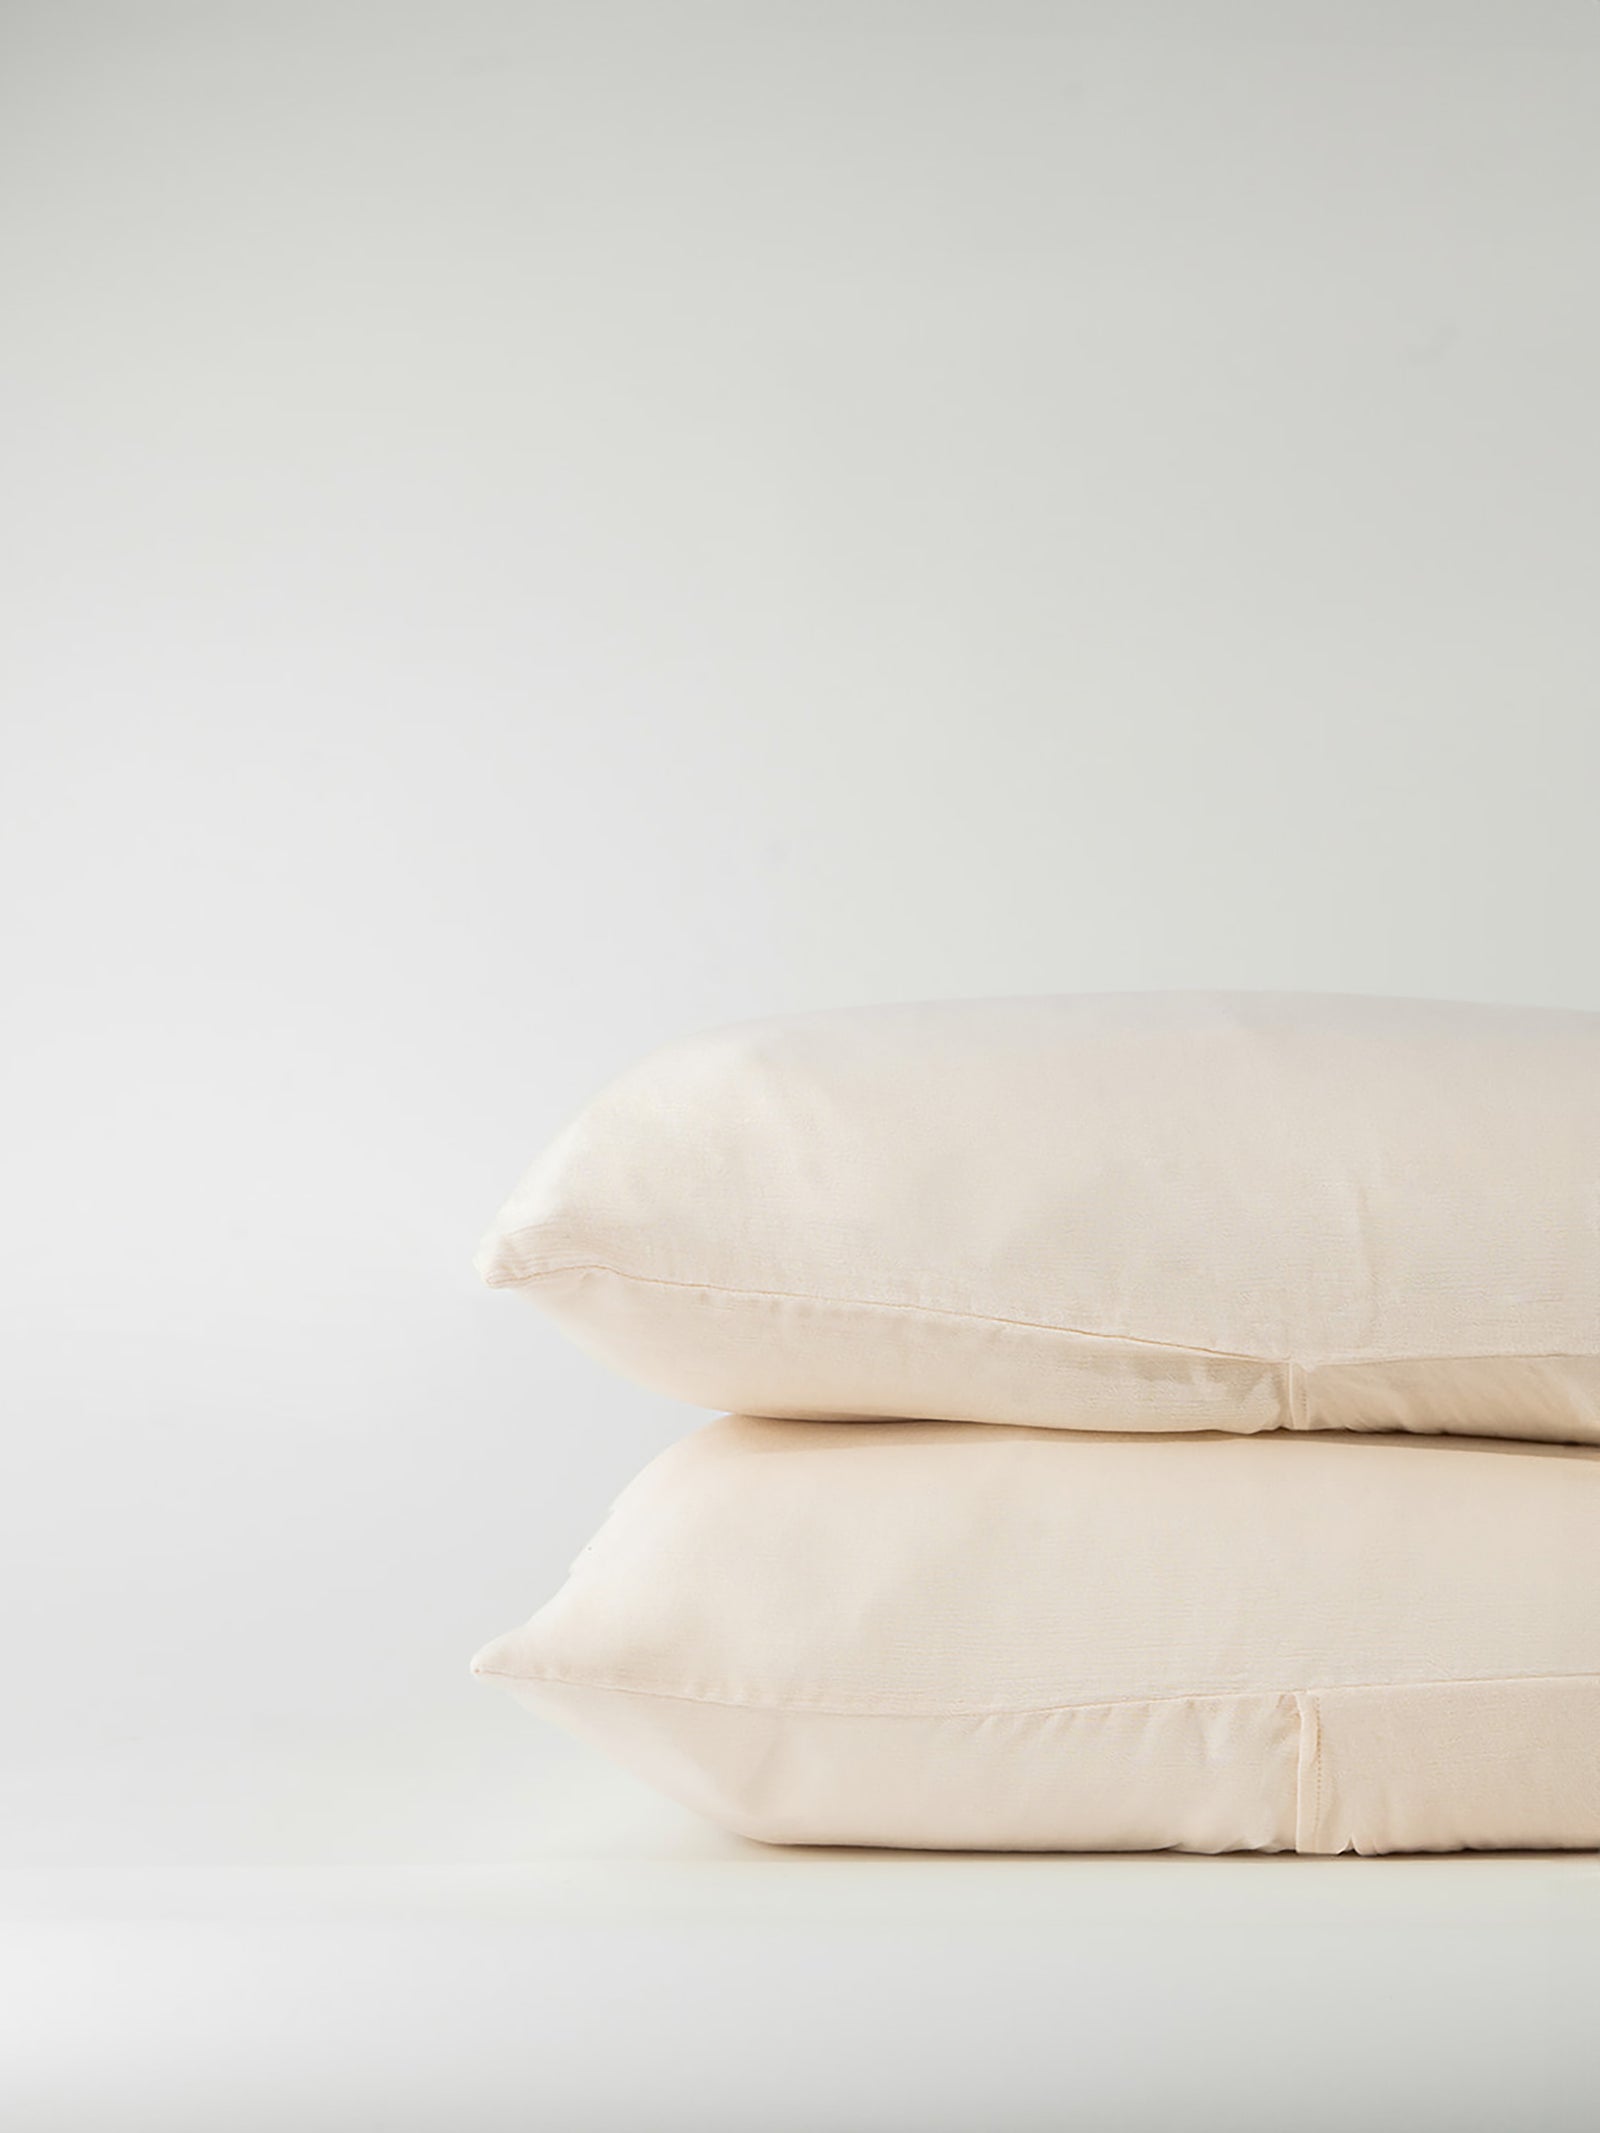 Buttermilk Aire Bamboo Shams. The shams are photographed with a white background